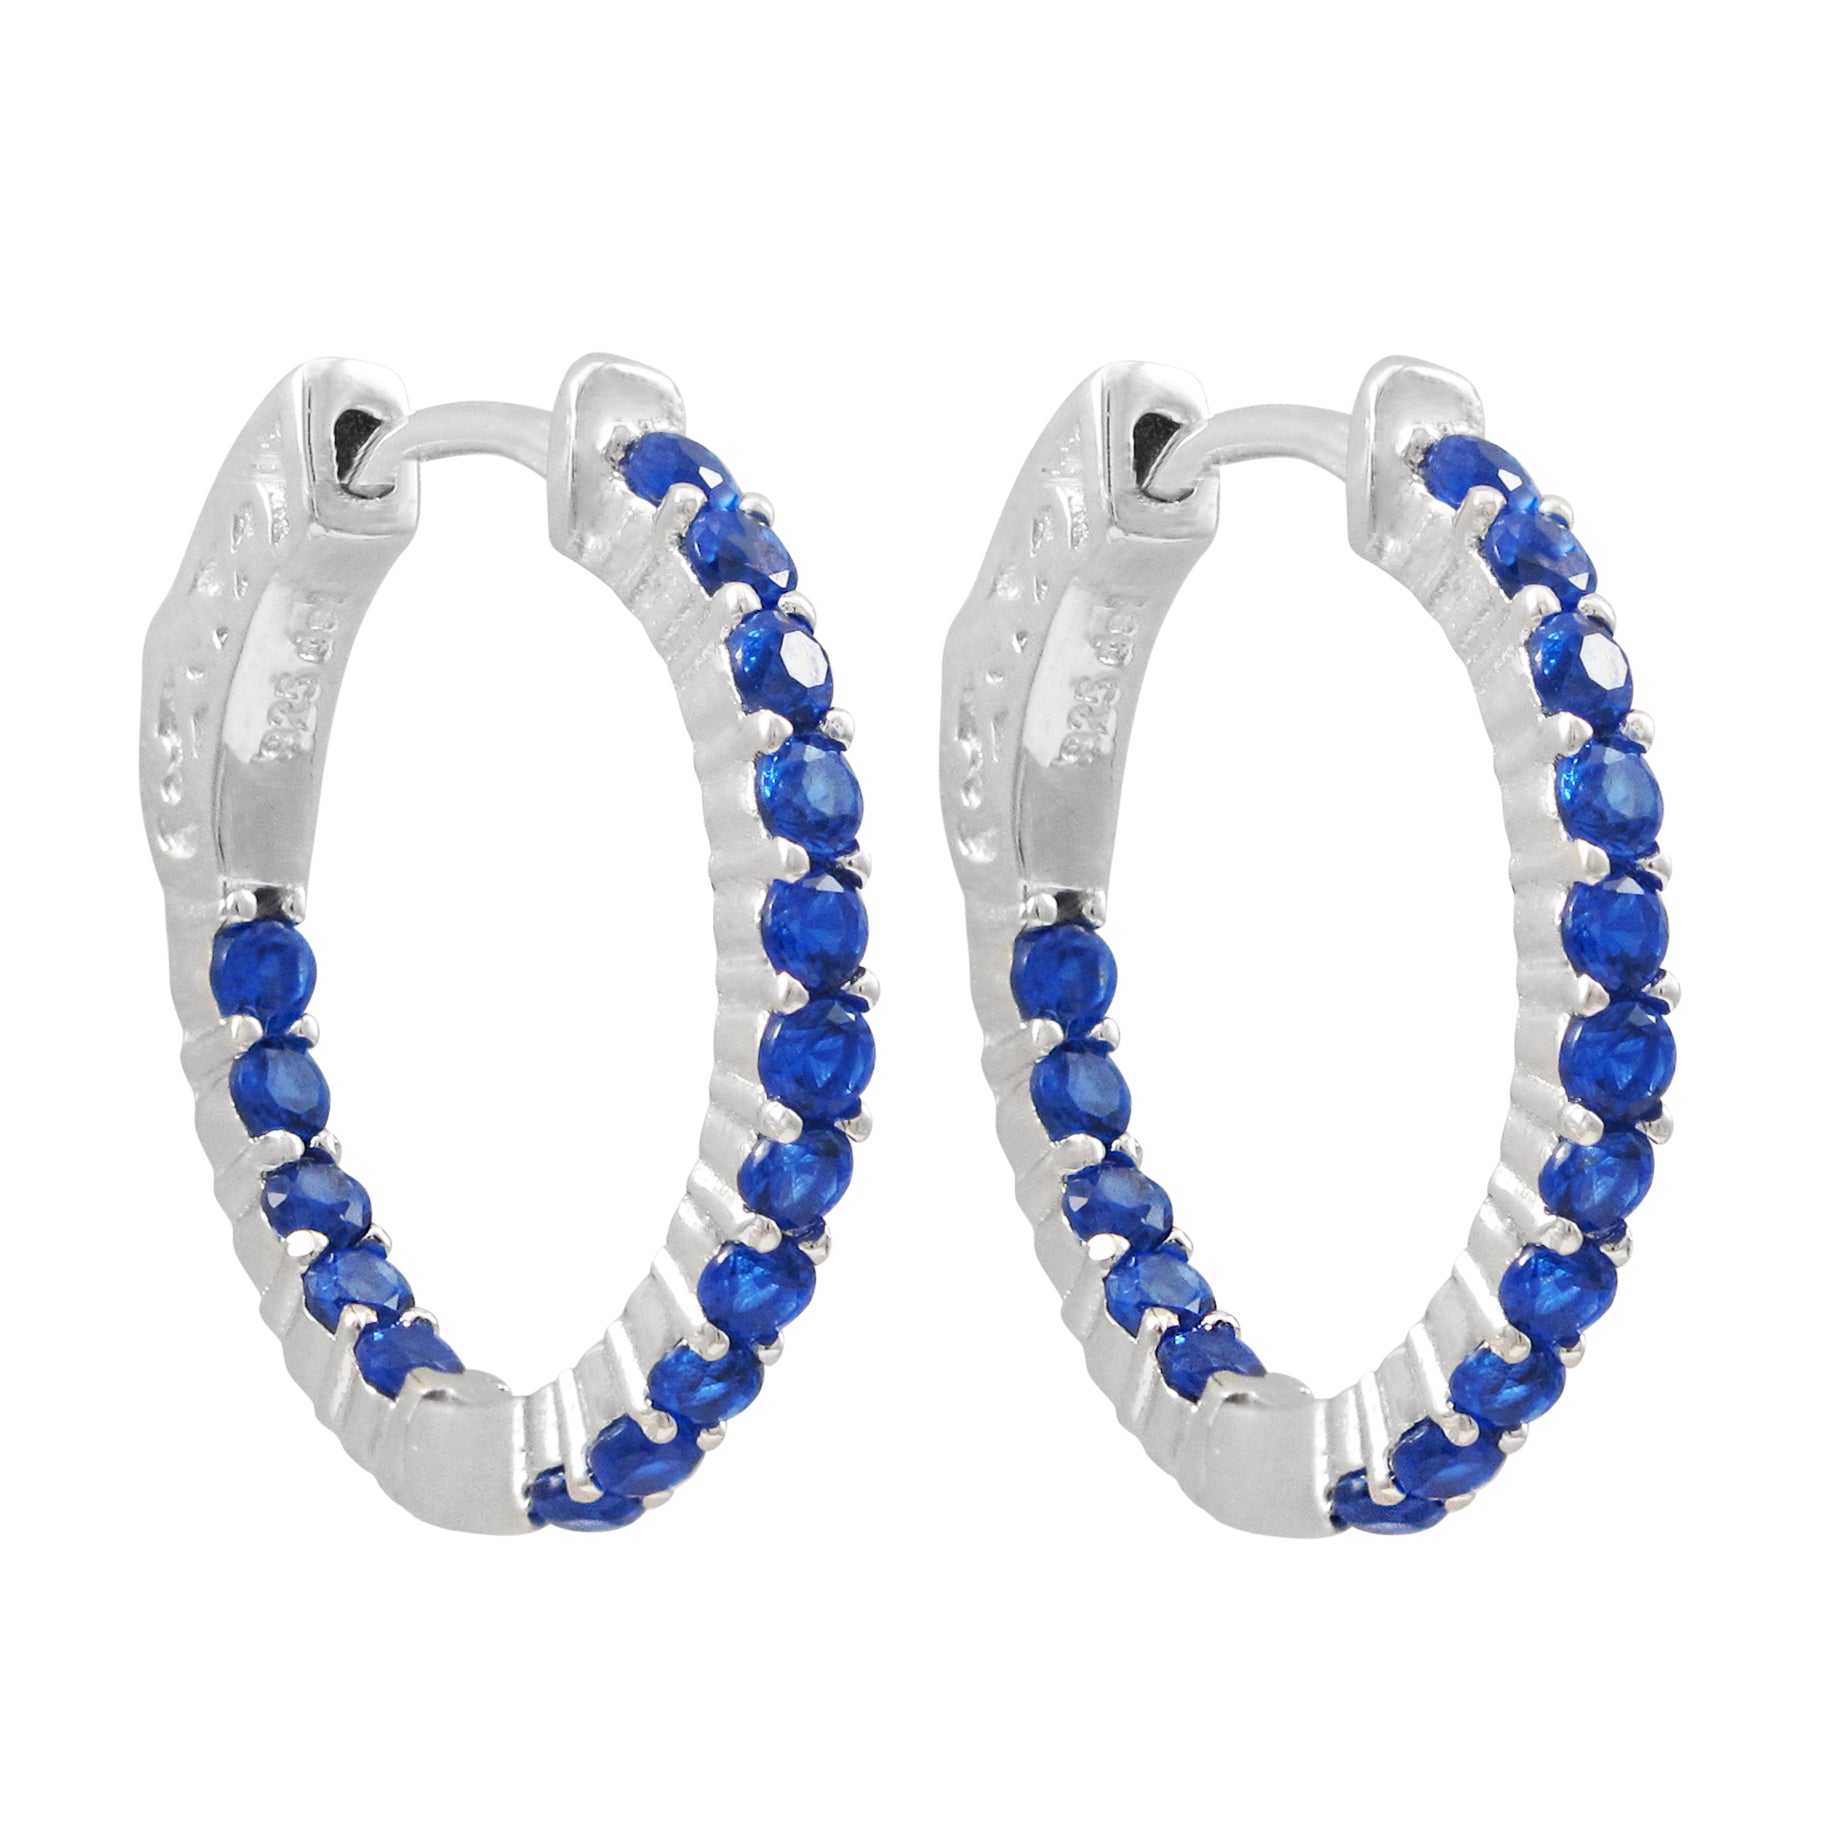 Small Colored Hoops